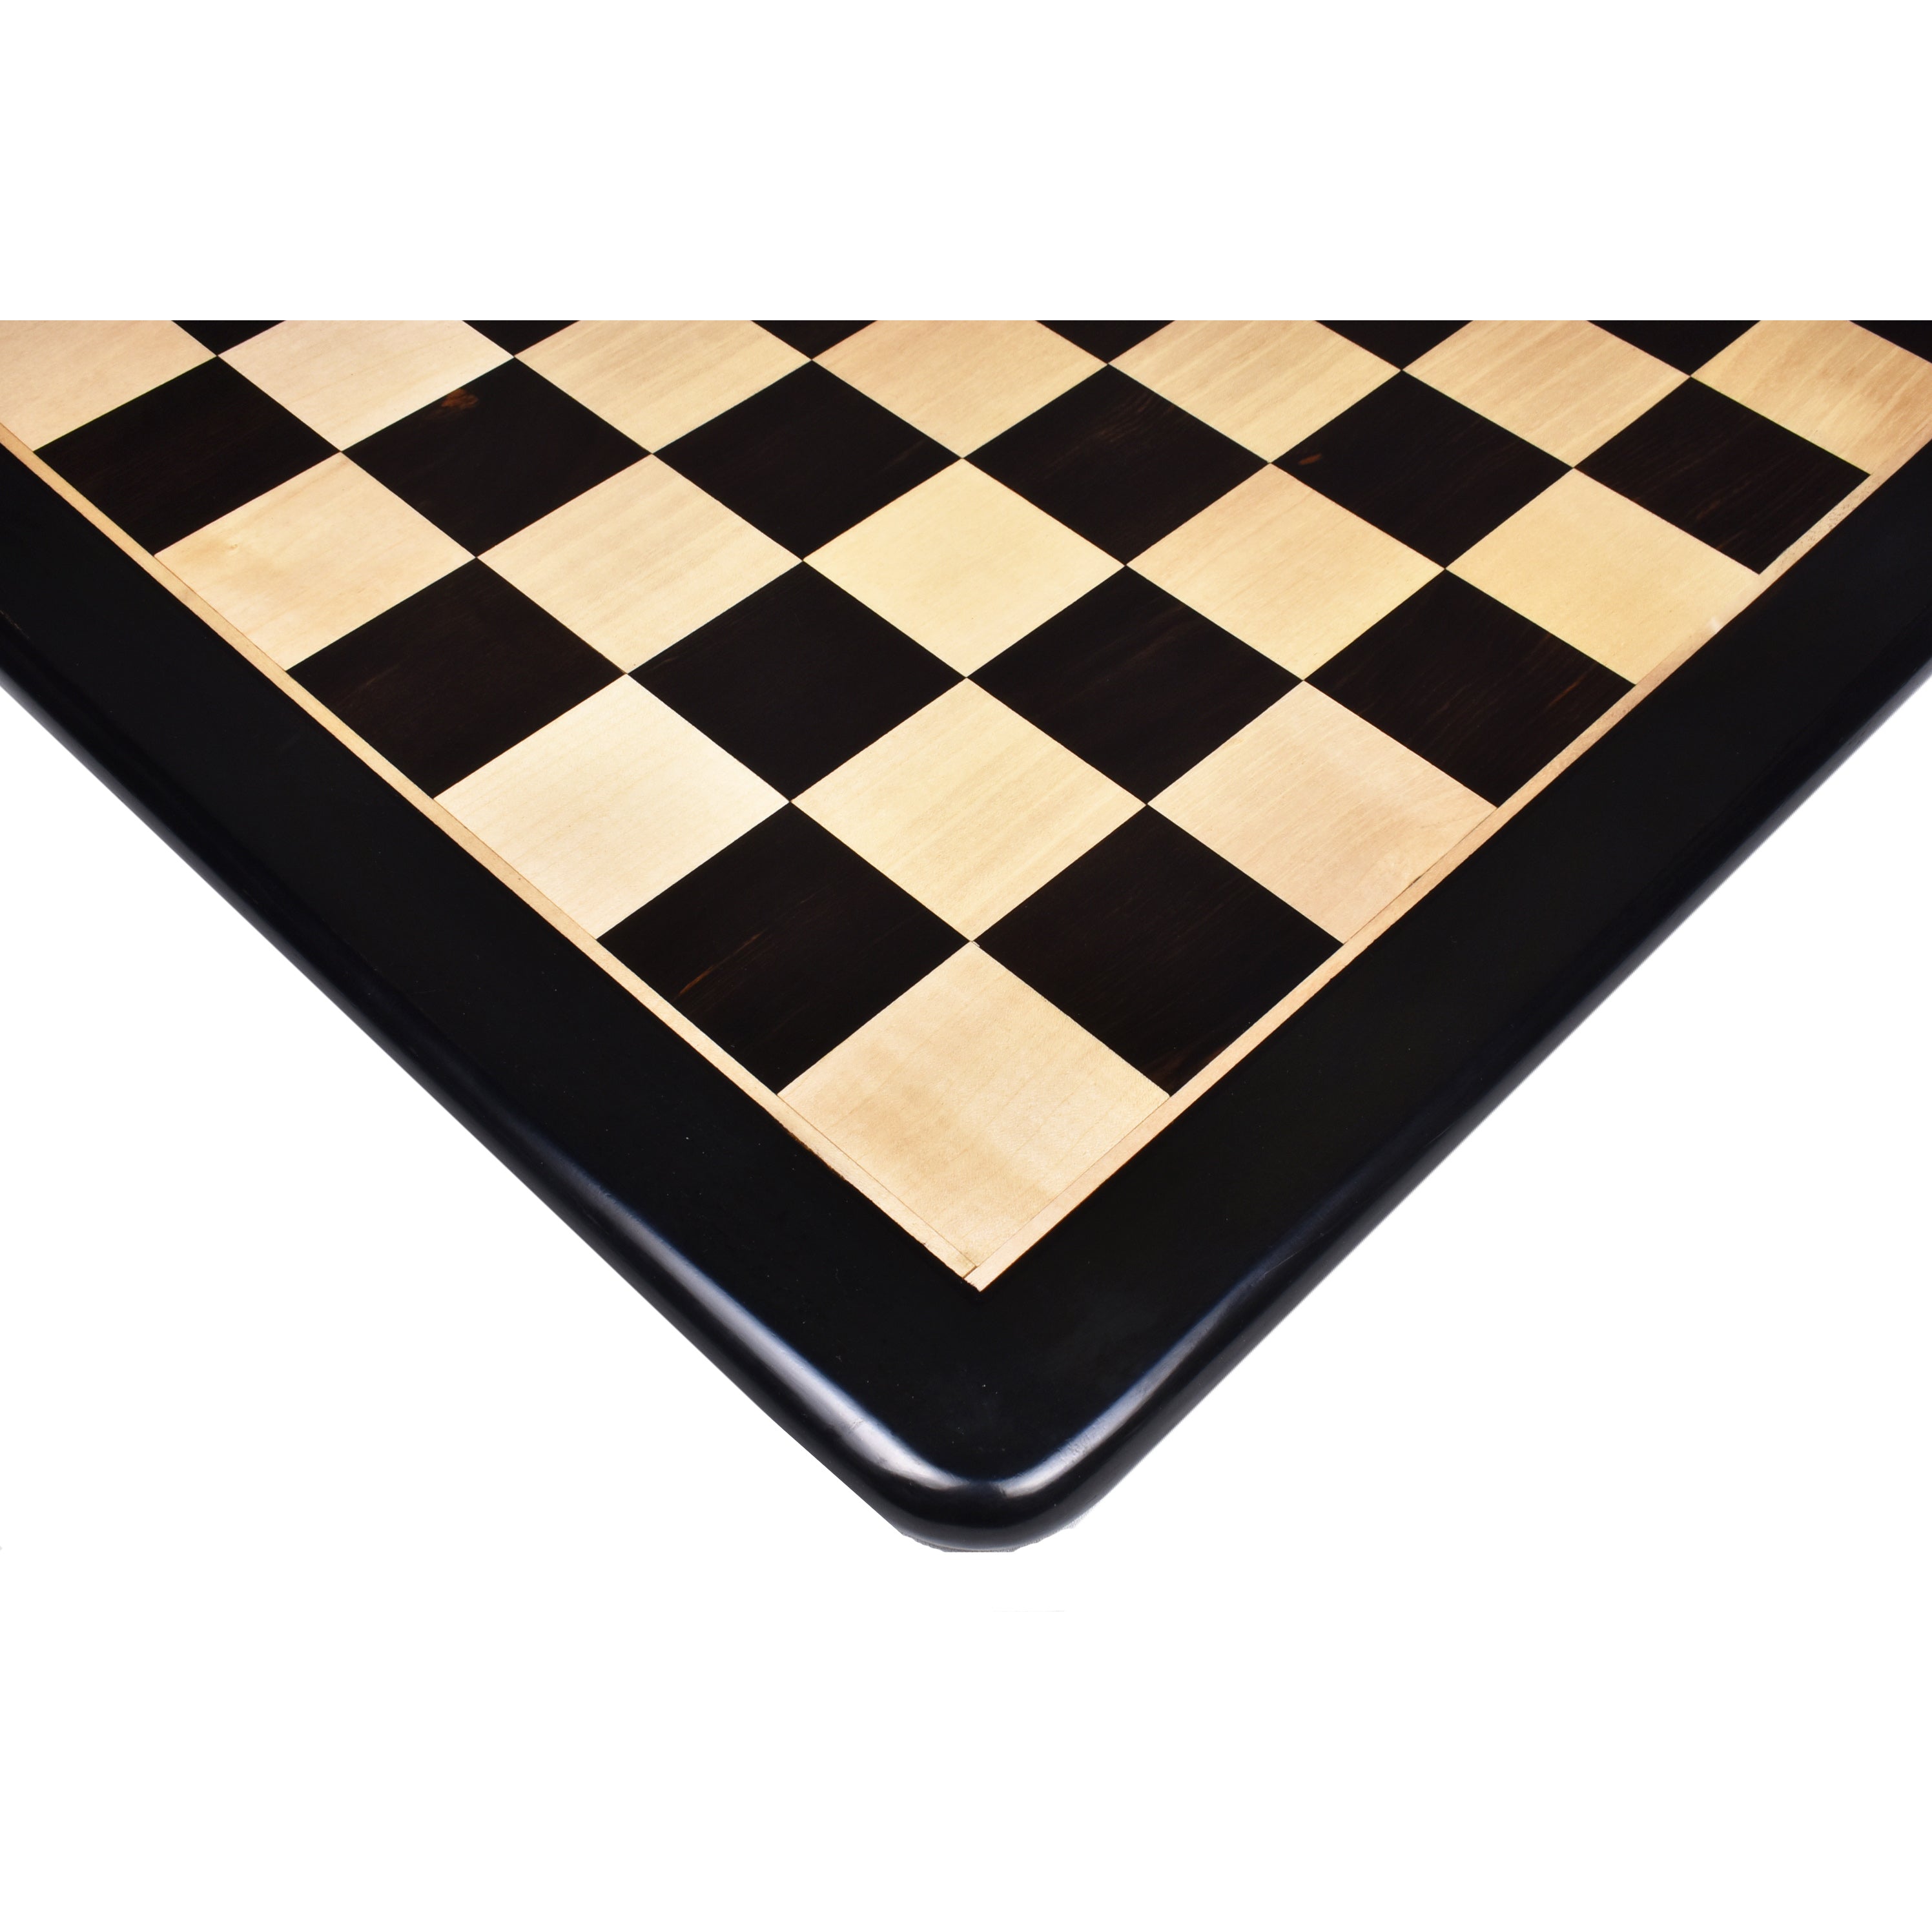 Combo of Repro 2016 Sinquefield Staunton Chess Set - Pieces in Ebony Wood with Board and Box